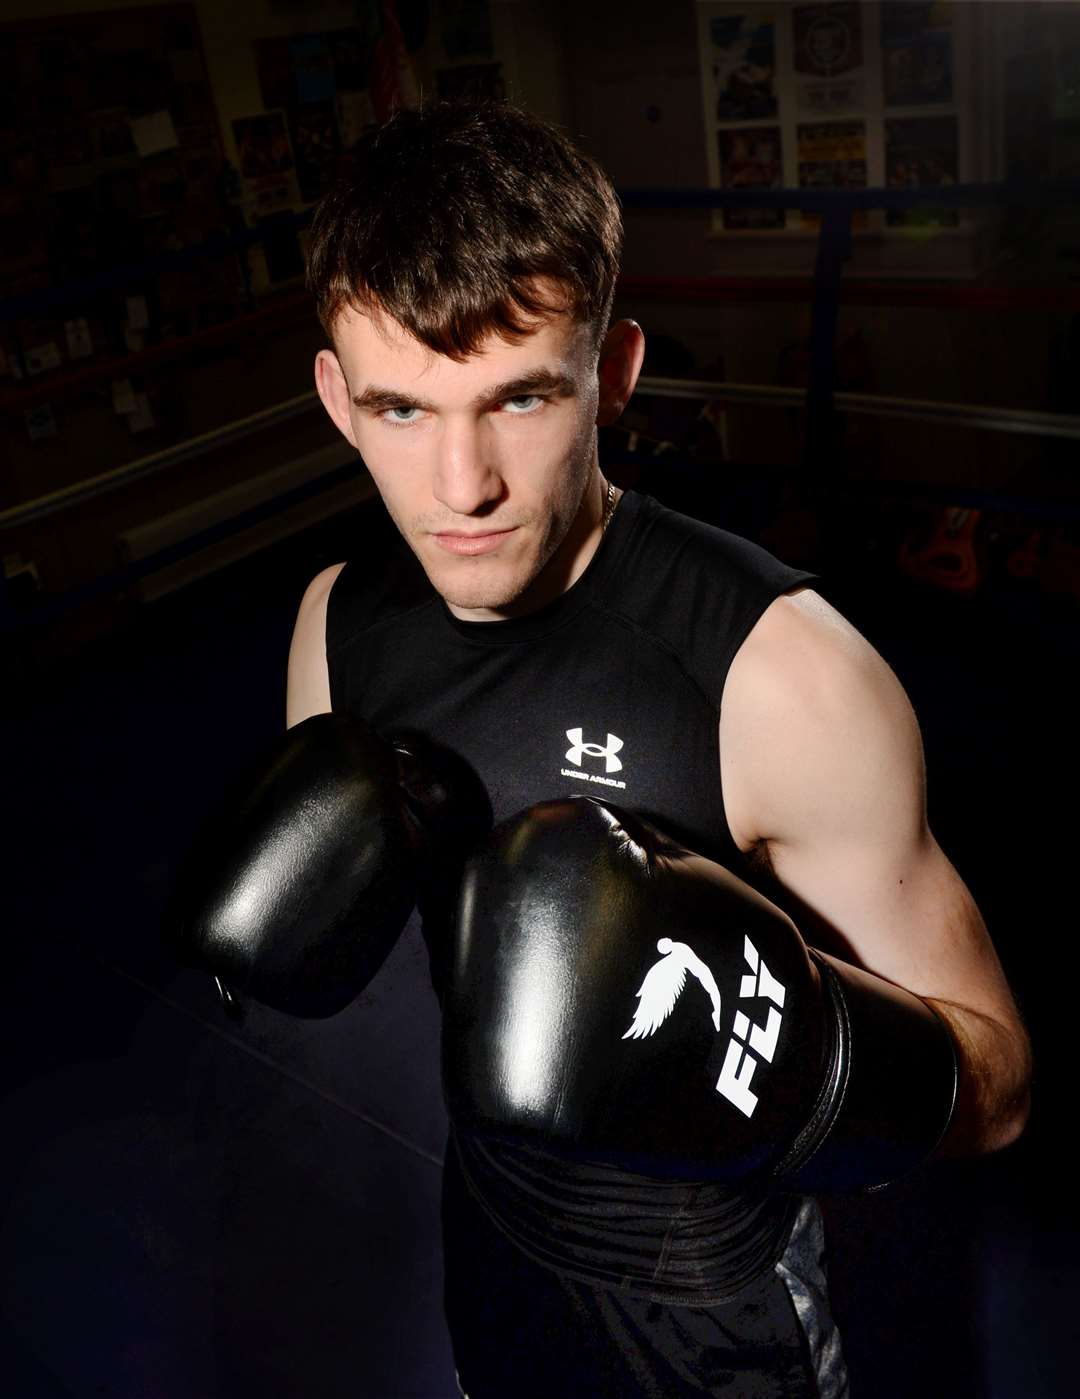 Inverness boxer Calum Turnbull. Picture Gary Anthony.